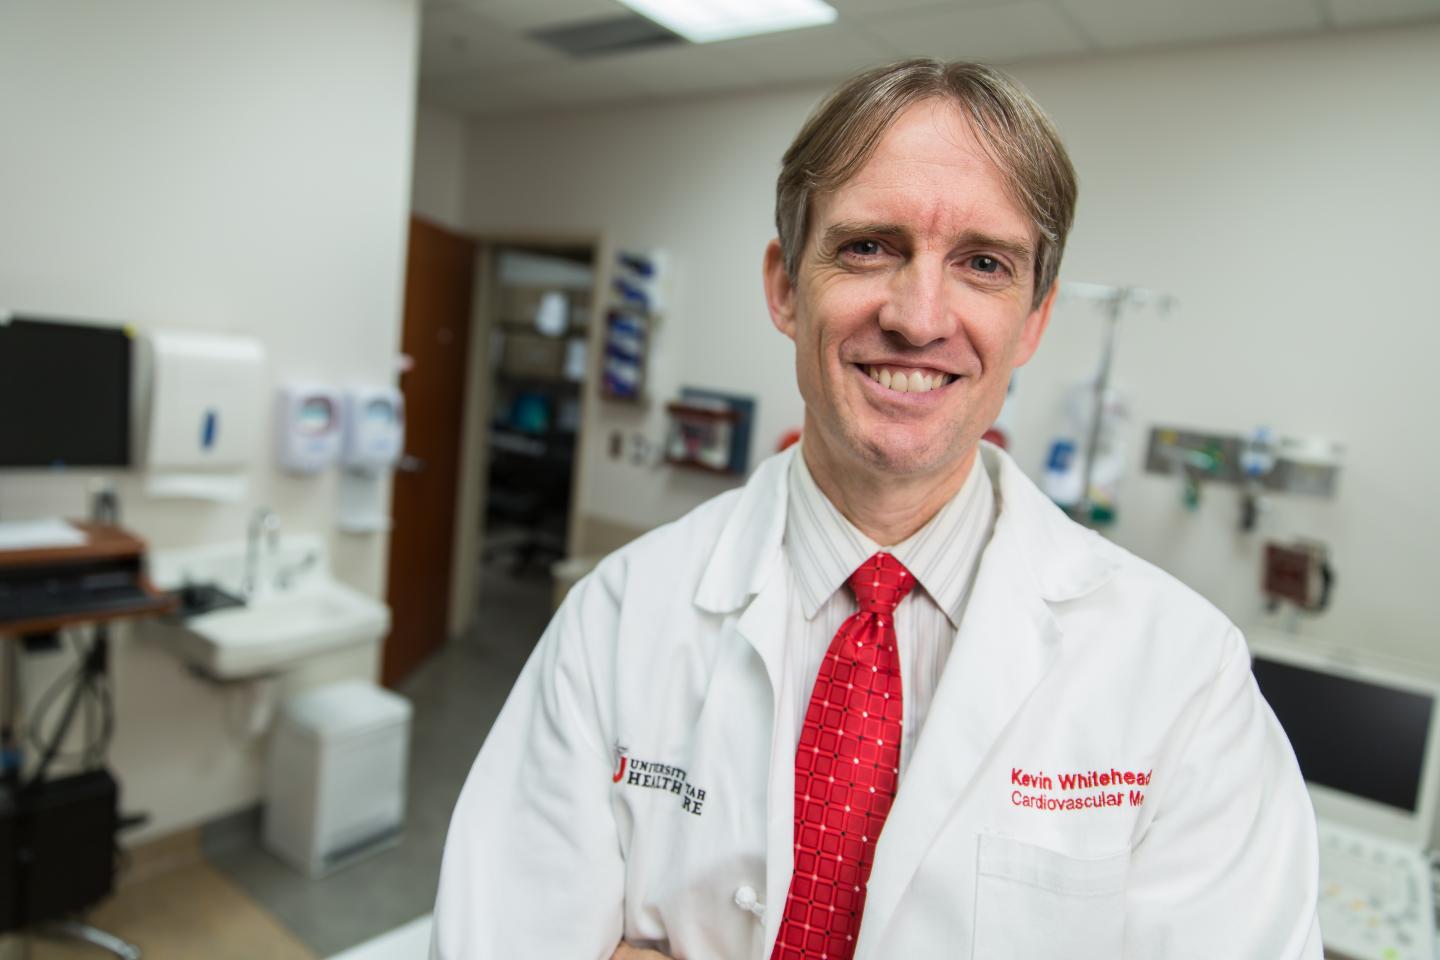 Kevin Whitehead, M.D., F.A.H.A., University of Utah Health Sciences